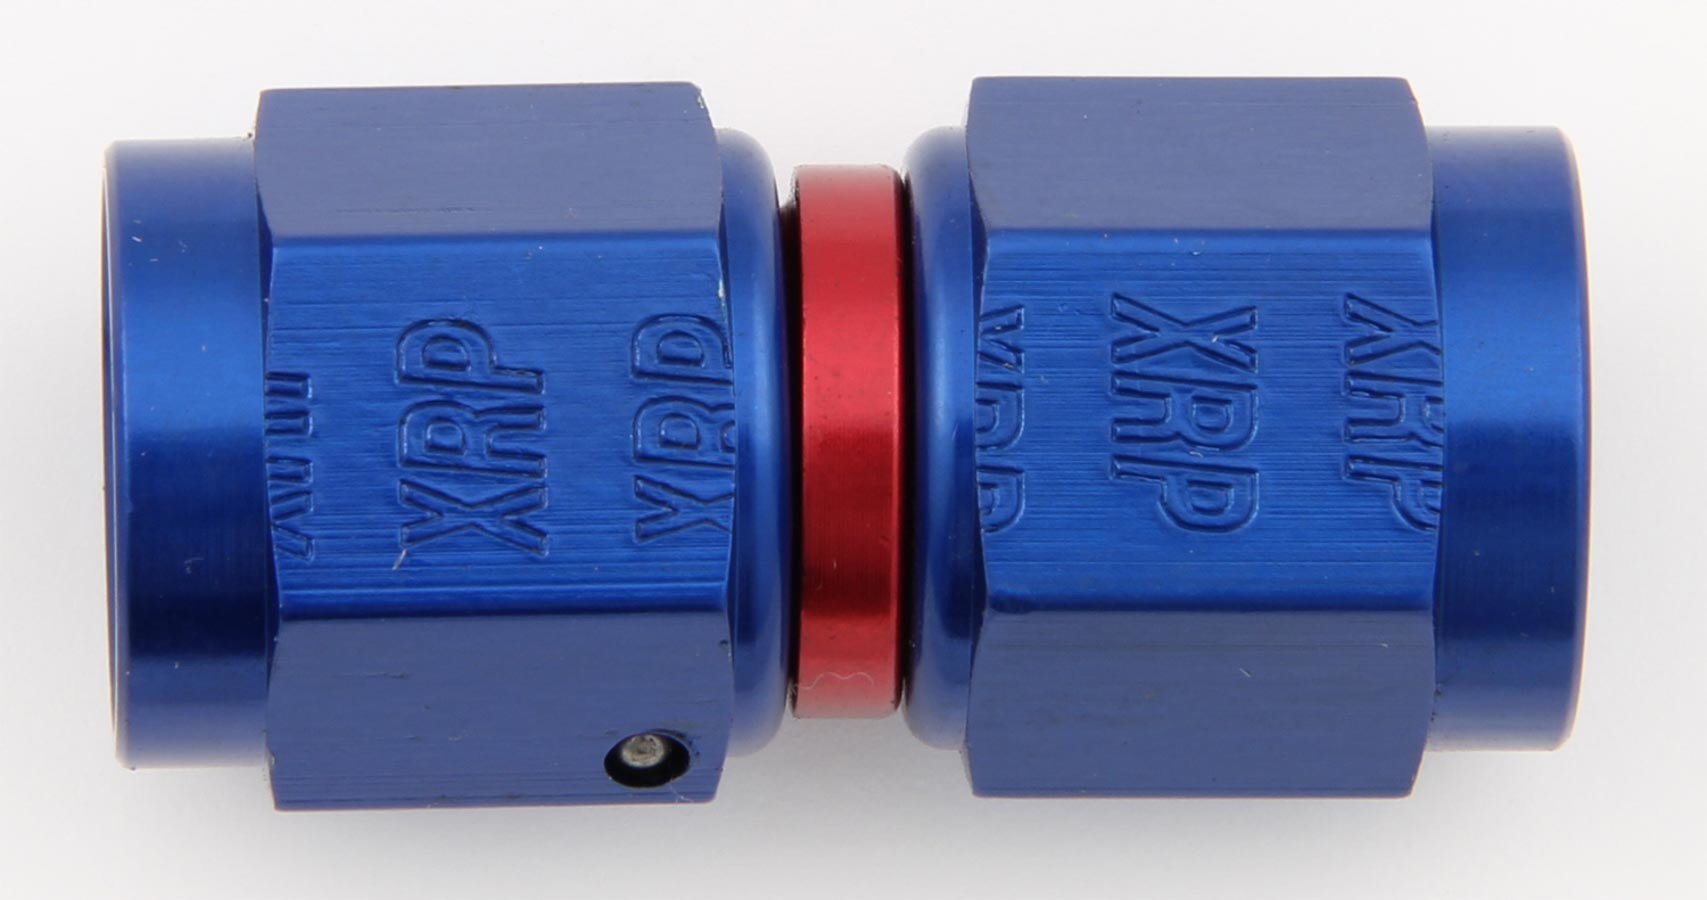 XRP 900110 Fitting, Adapter, Straight, 10 AN Female Swivel to 10 AN Female Swivel, Aluminum, Blue / Red Anodized, Each